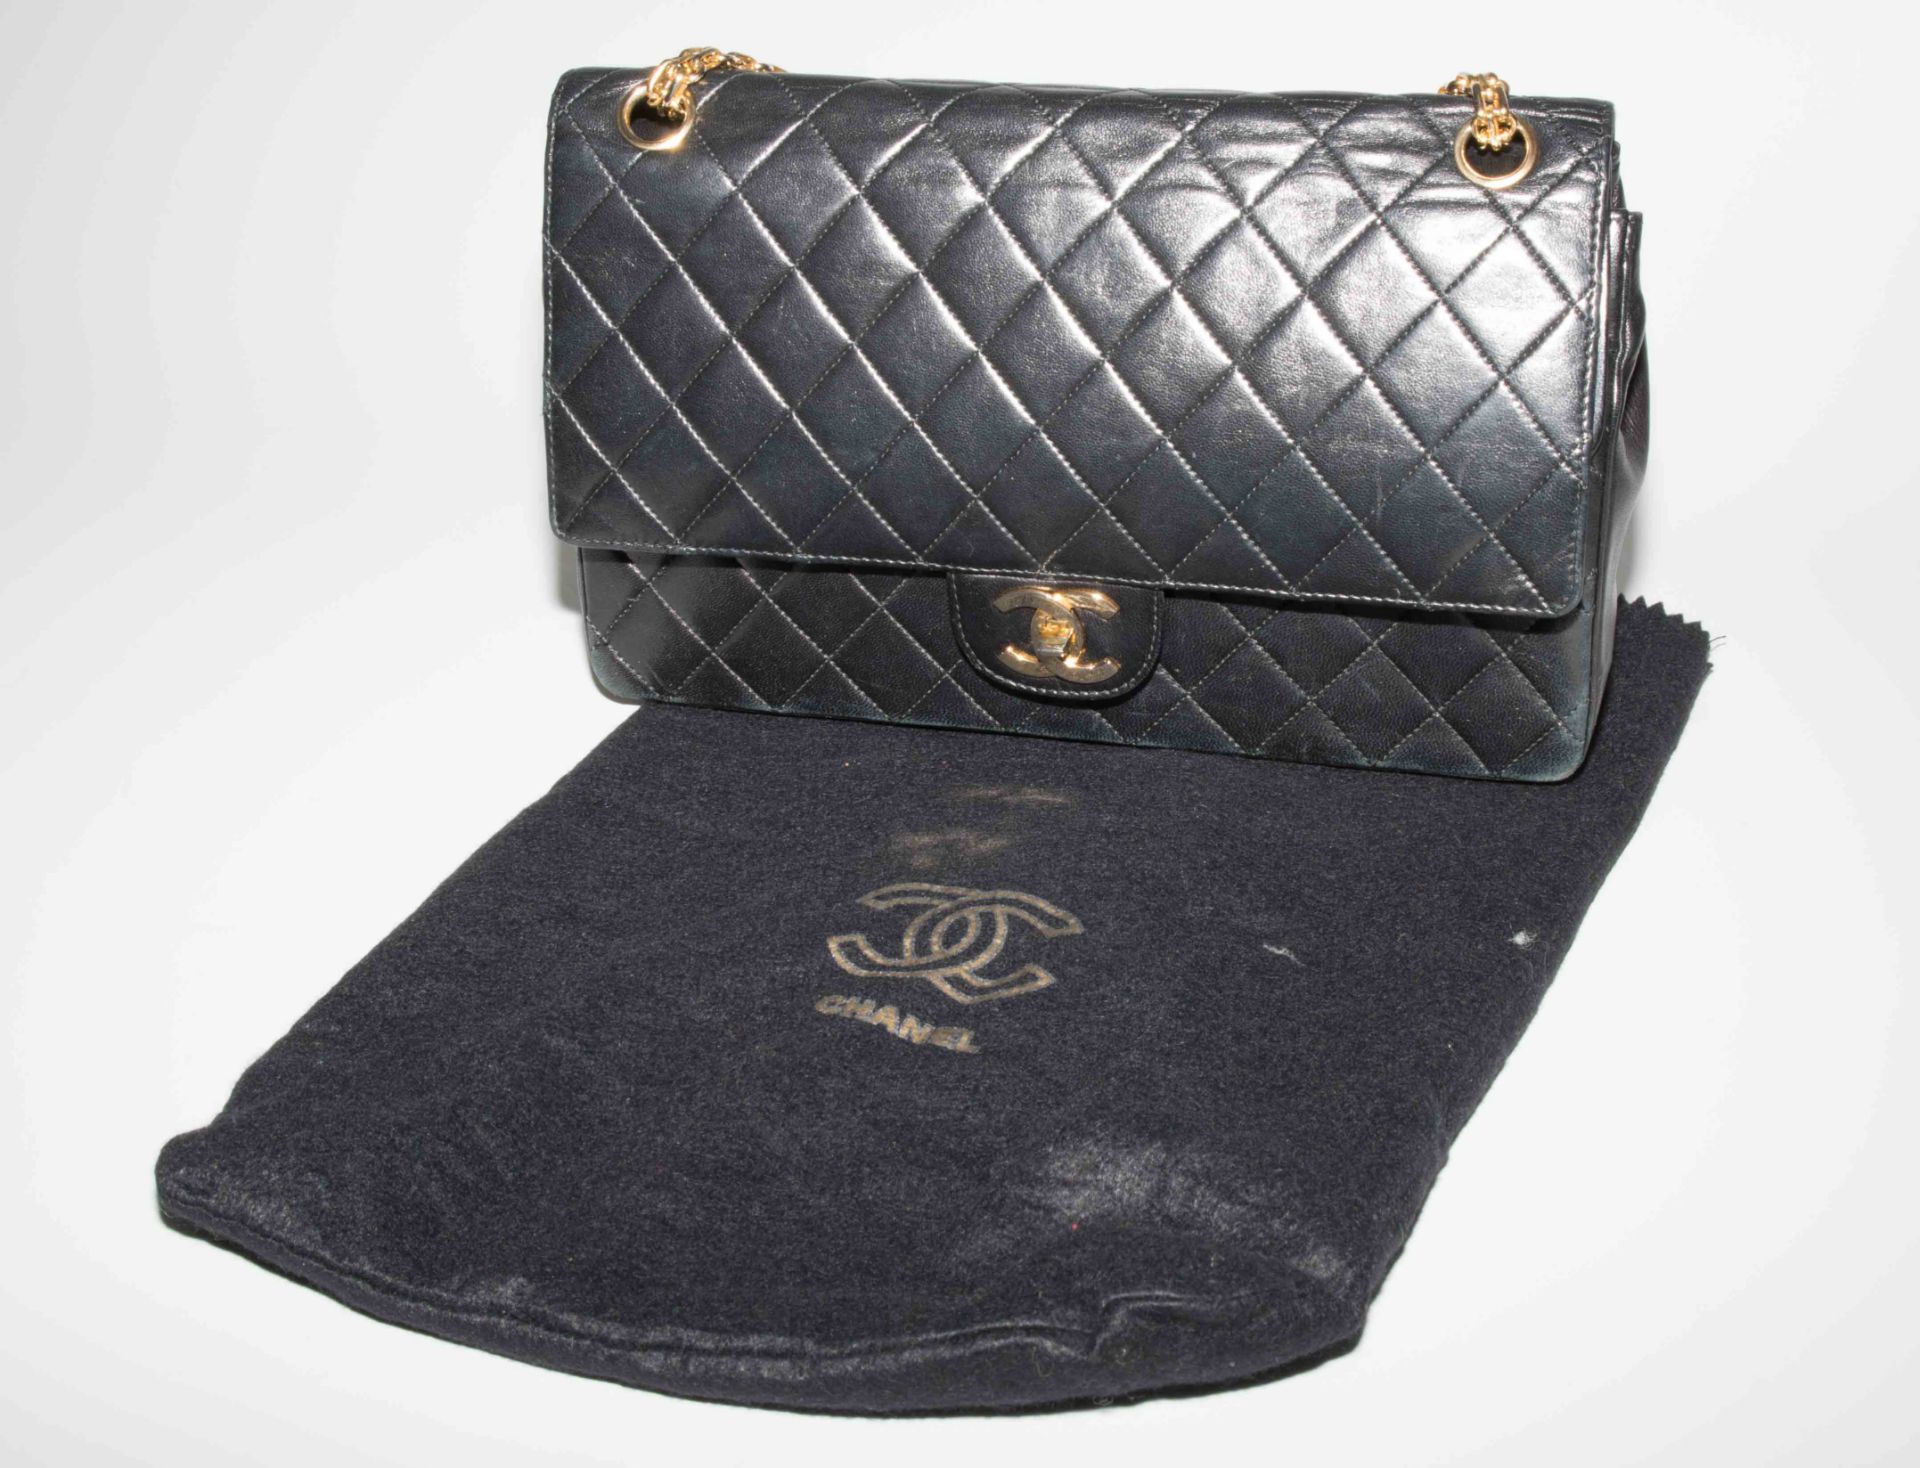 Chanel, Handtasche "Timeless" - Image 15 of 15